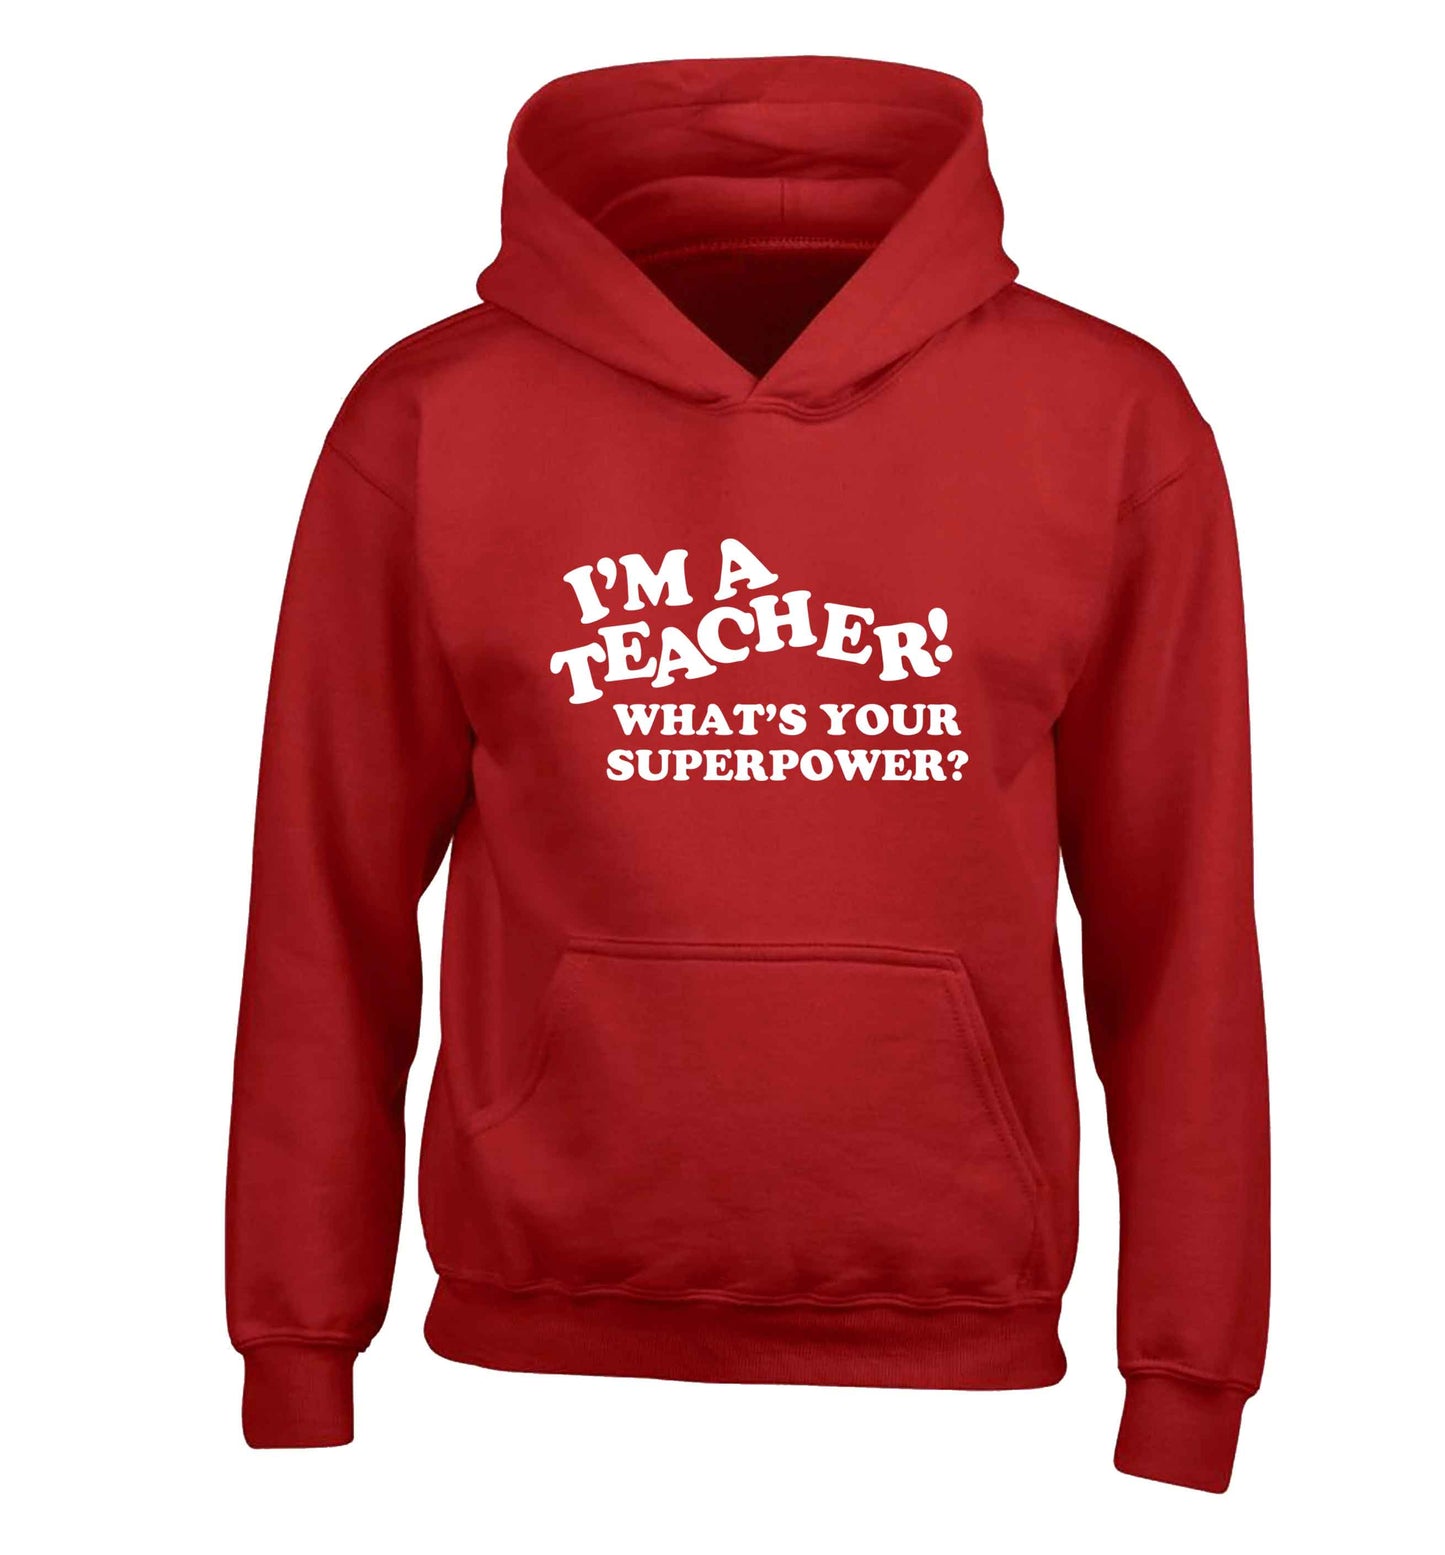 I'm a teacher what's your superpower?! children's red hoodie 12-13 Years